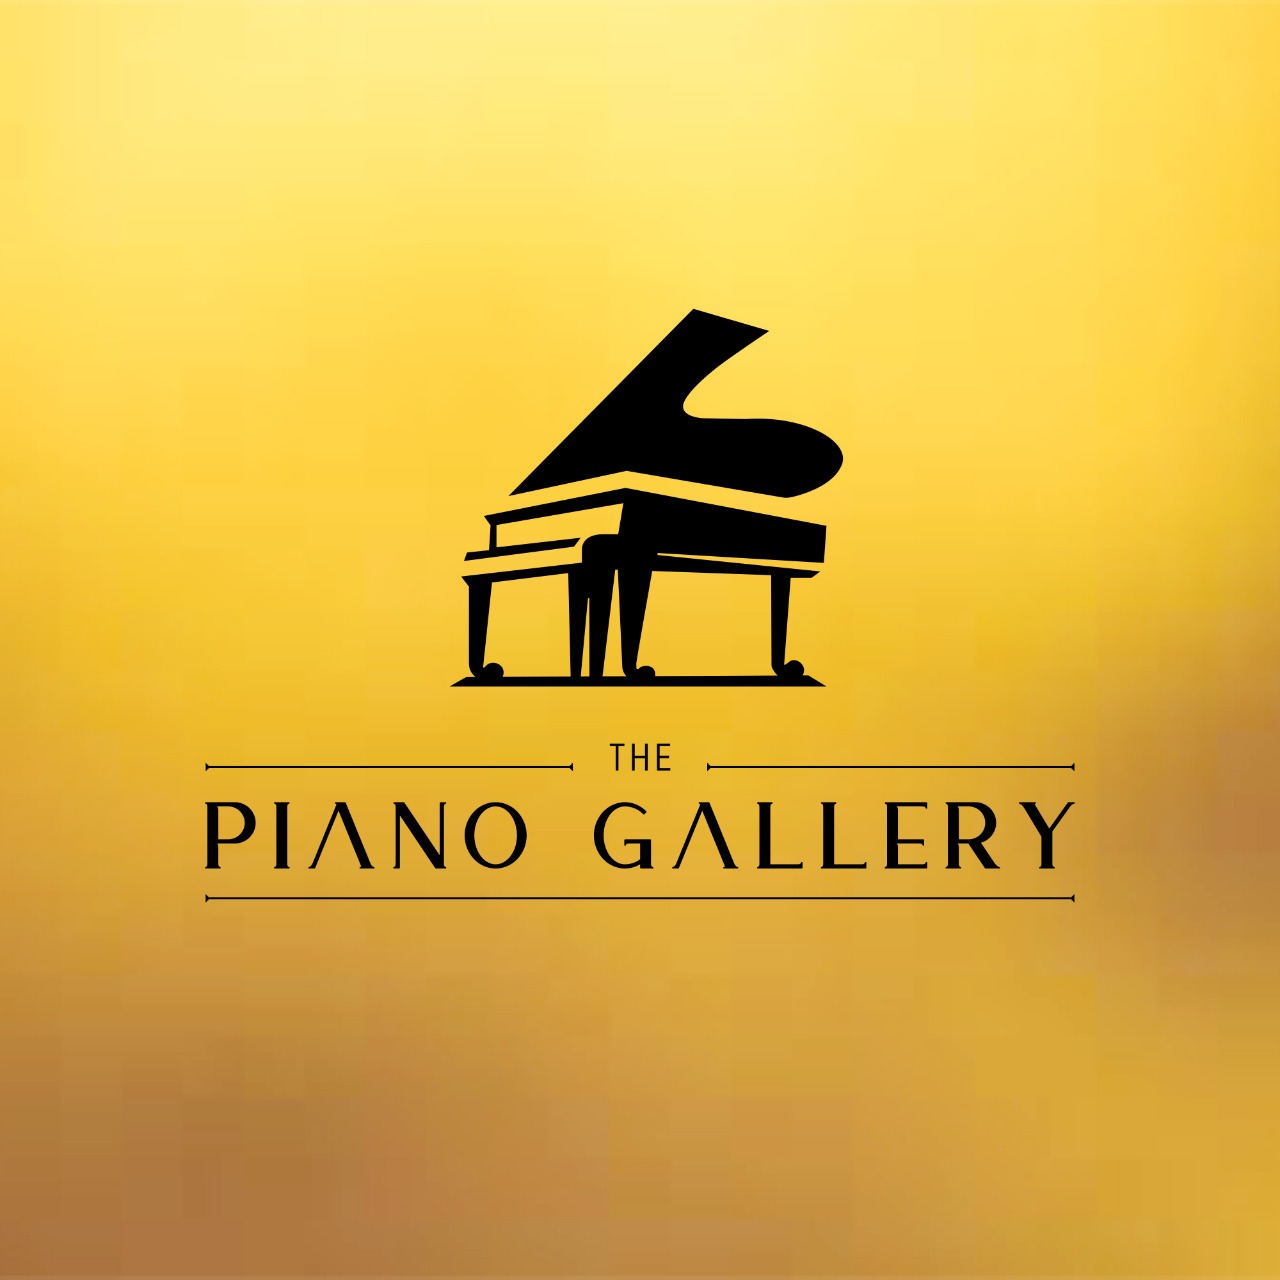 buy good quality used Pianos